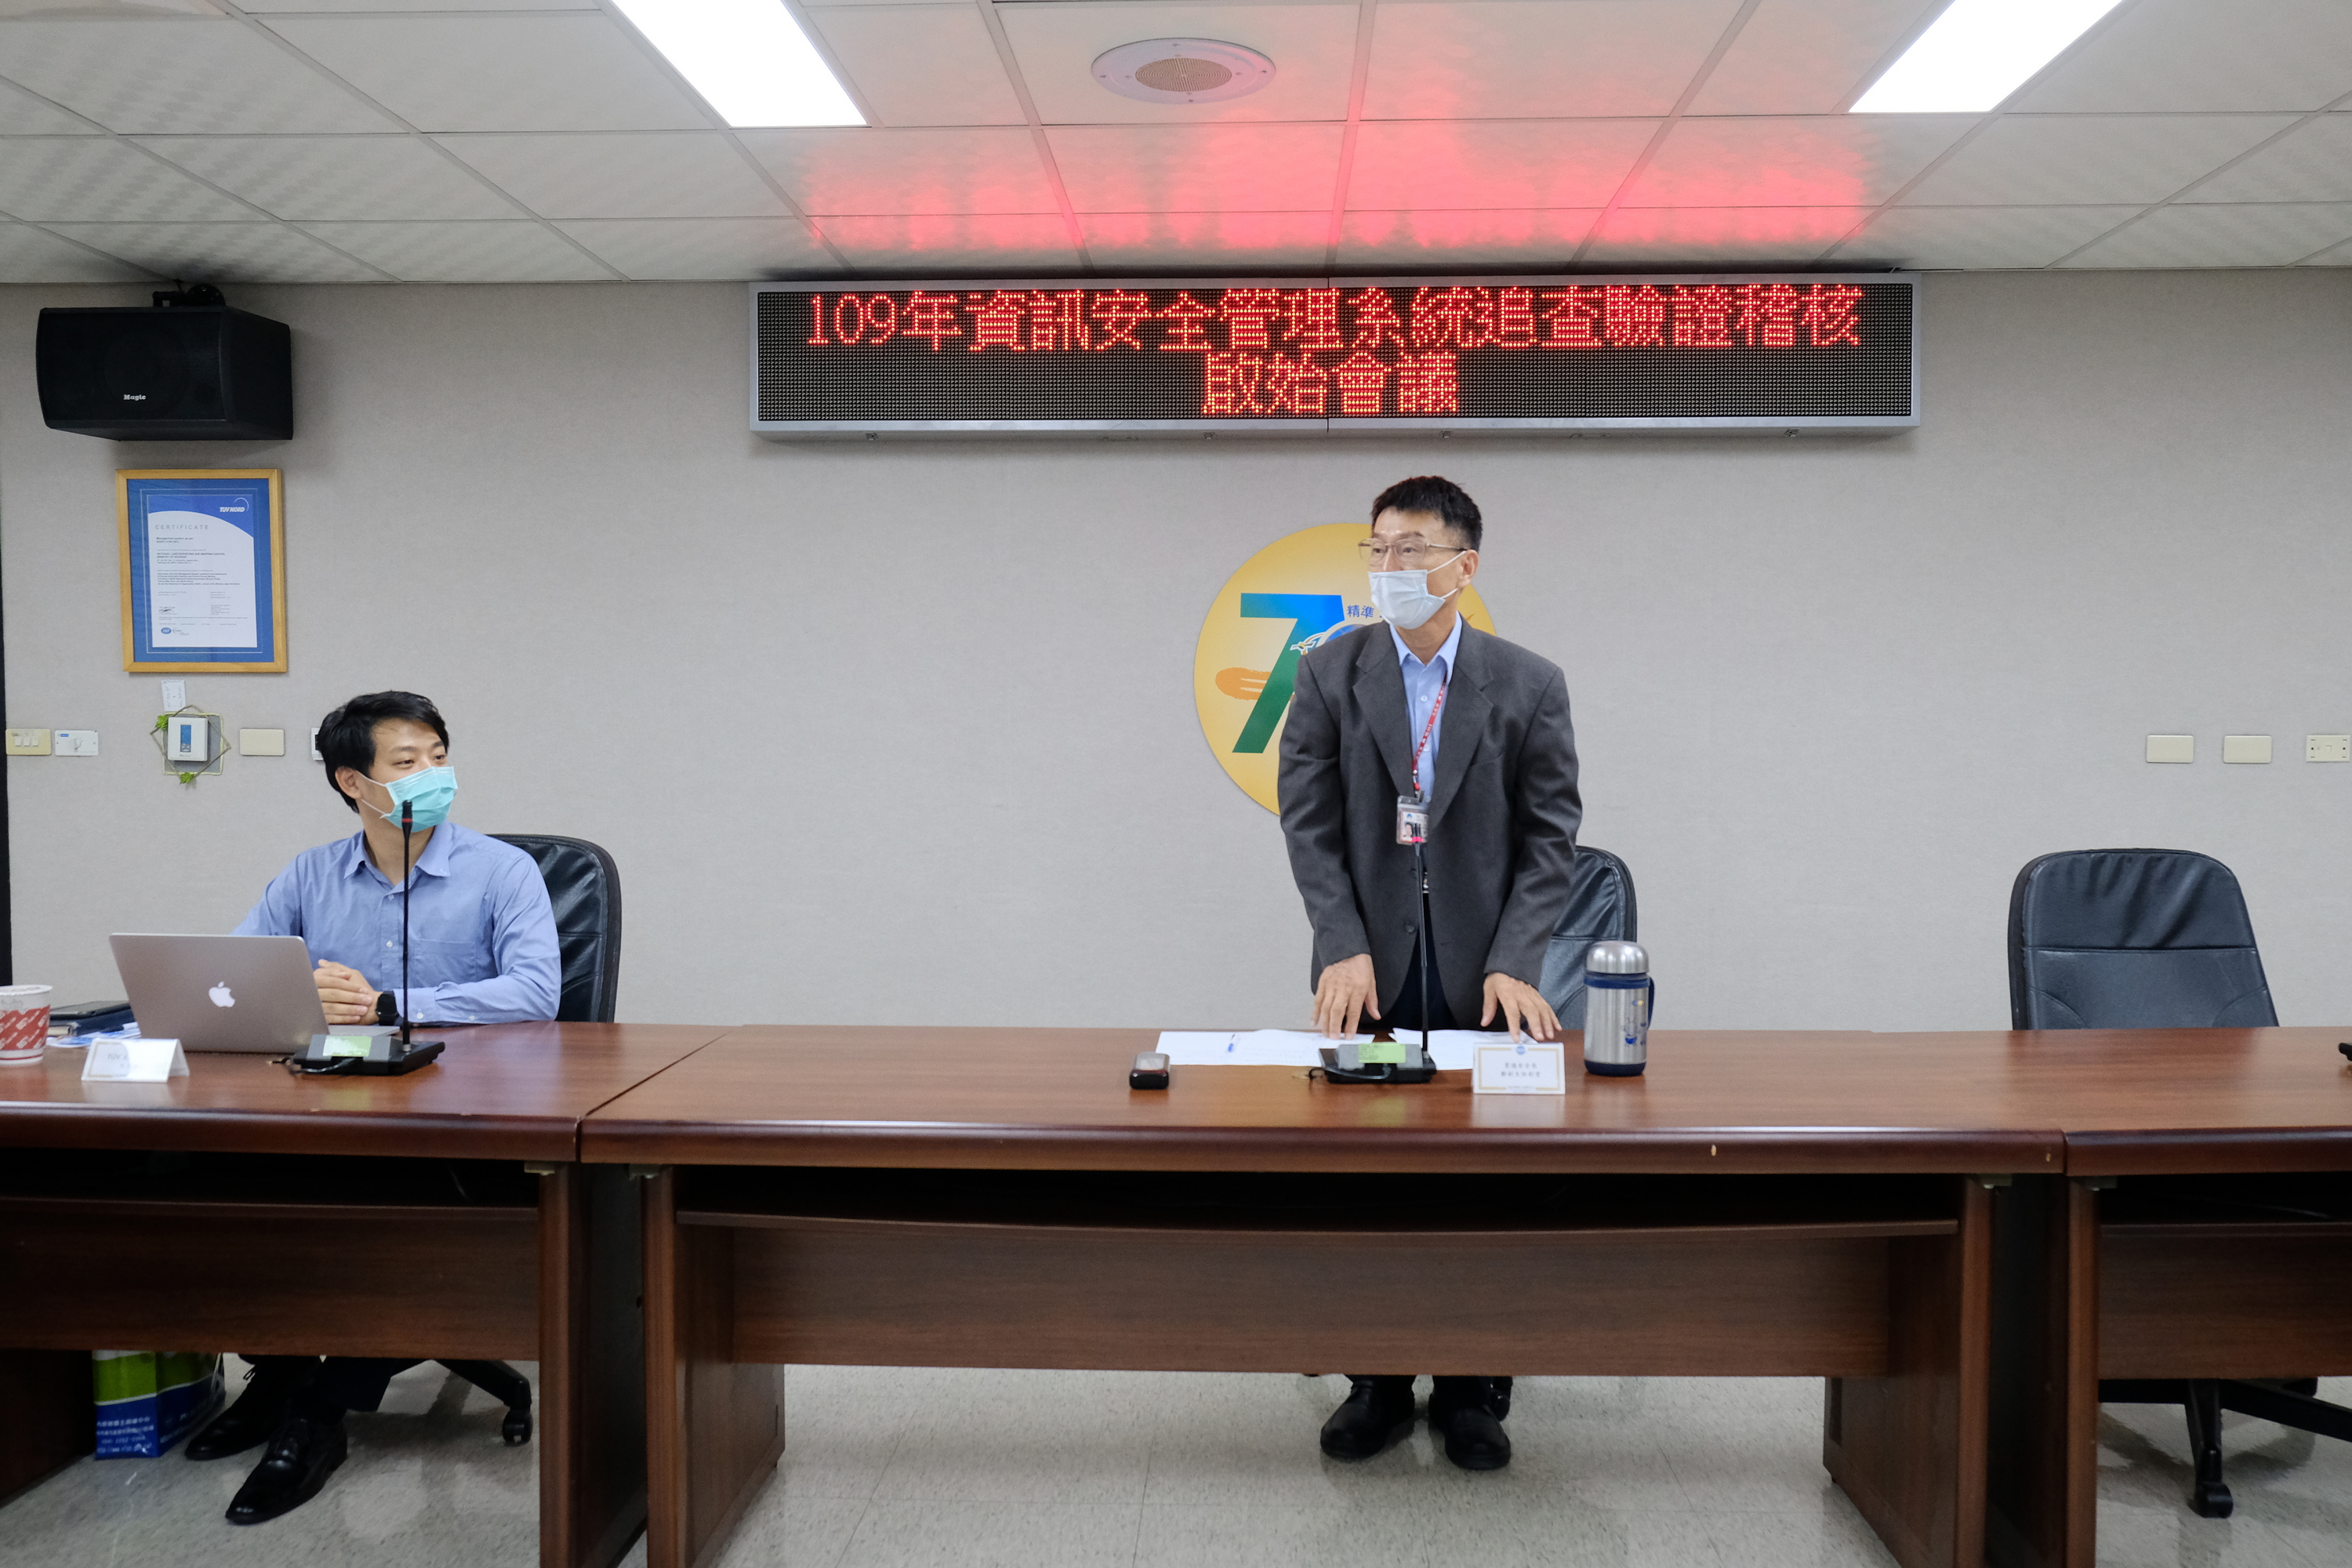 CHENG, TSAI-TANG, the Deputy Director of NLSC and Bradley Chen, the Chief Auditor, preside the Opening Meeting..jpg